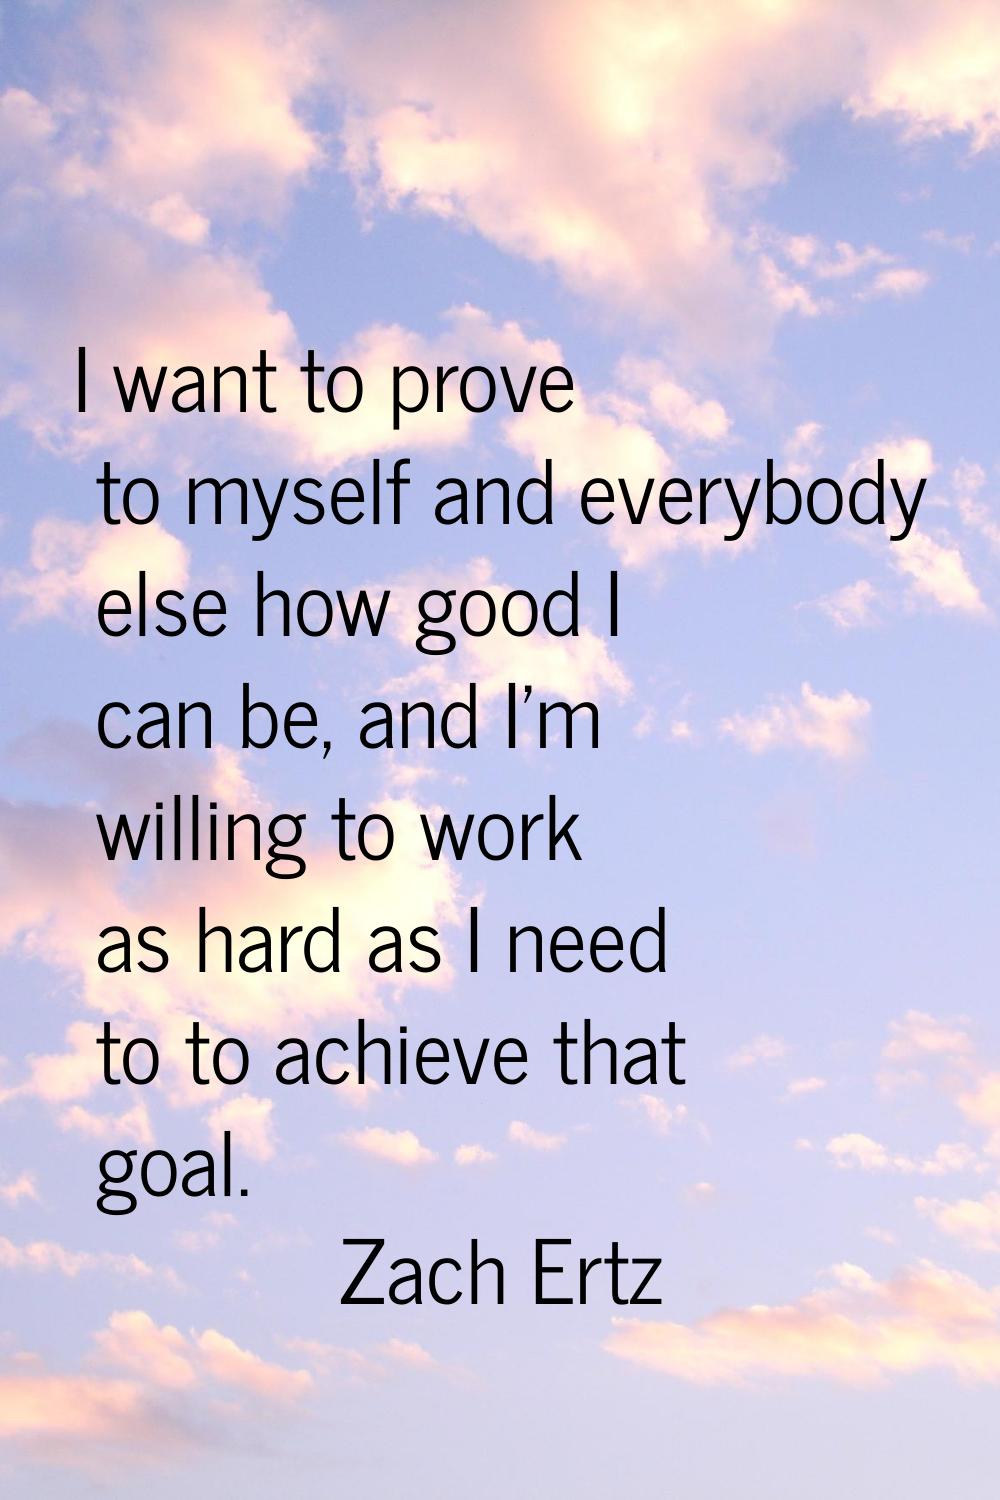 I want to prove to myself and everybody else how good I can be, and I'm willing to work as hard as 